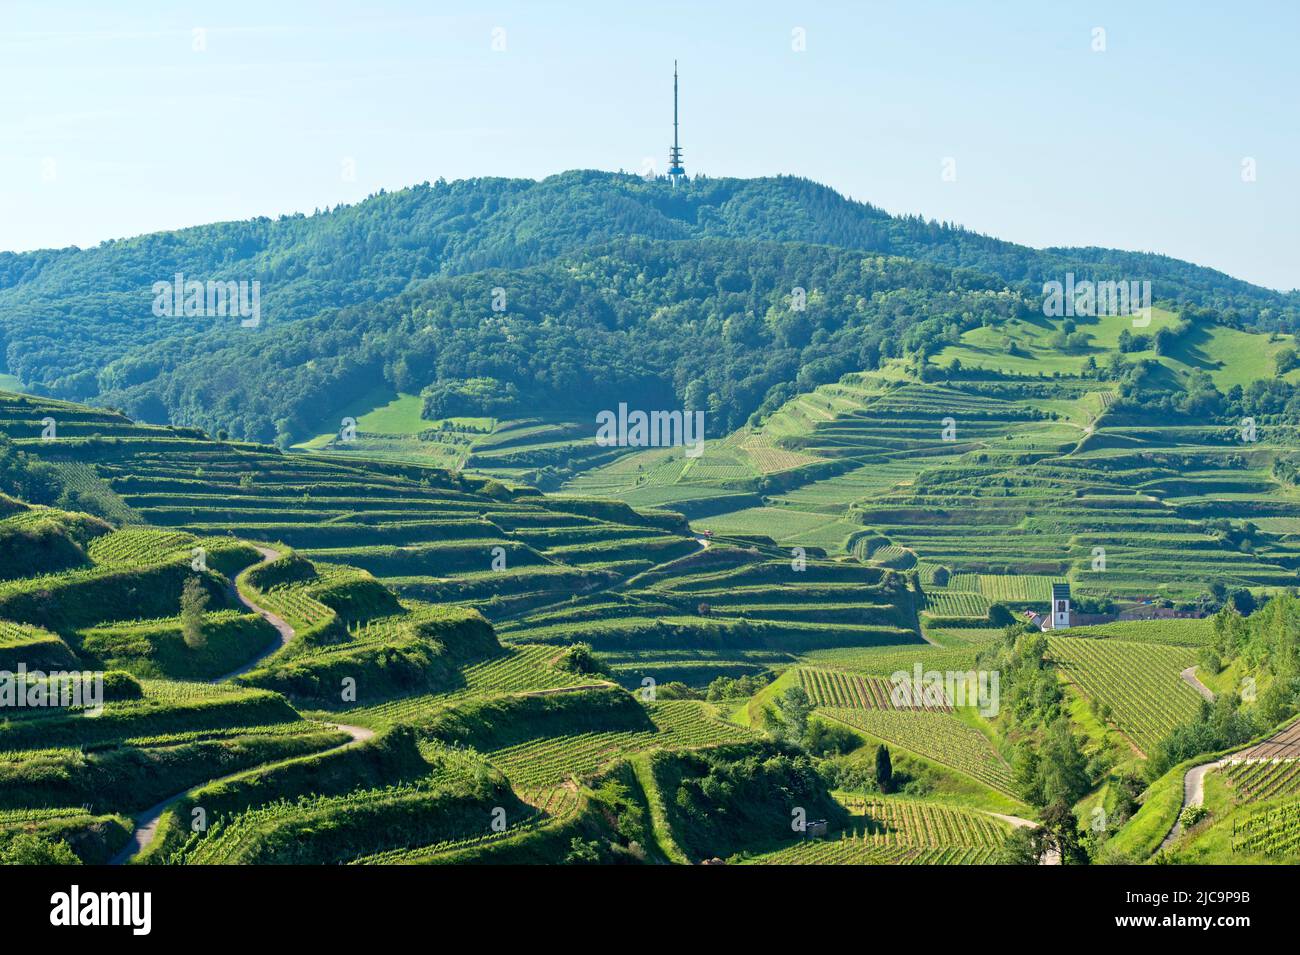 Trellis cultivation of vines on small terraces in the Kaiserstuhl area at the Totenkopf summit between Oberbergen and Kiechlinsbergen,Germany Stock Photo